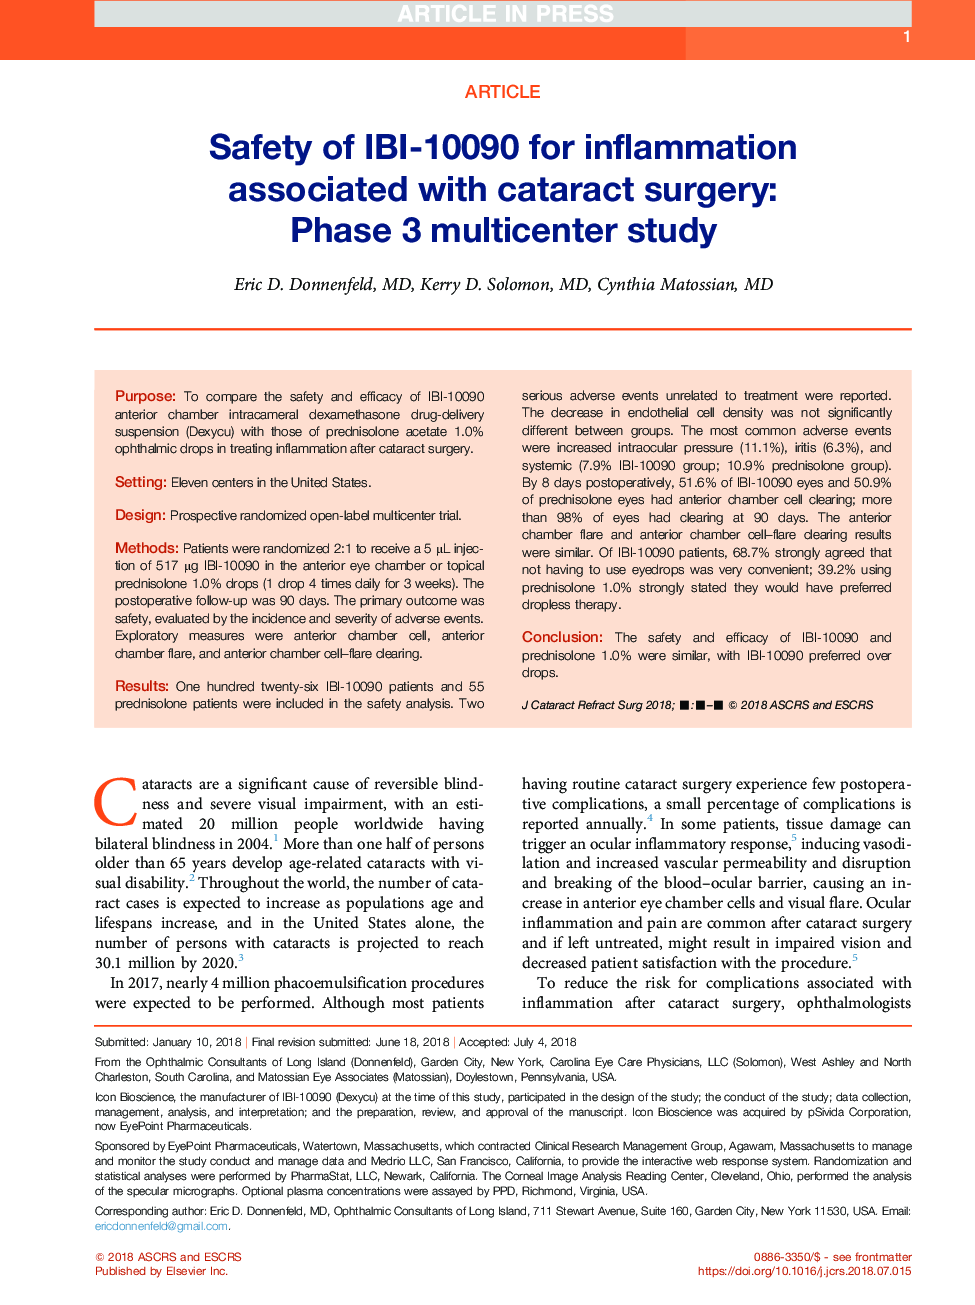 Safety of IBI-10090 for inflammation associated with cataract surgery: Phase 3 multicenter study